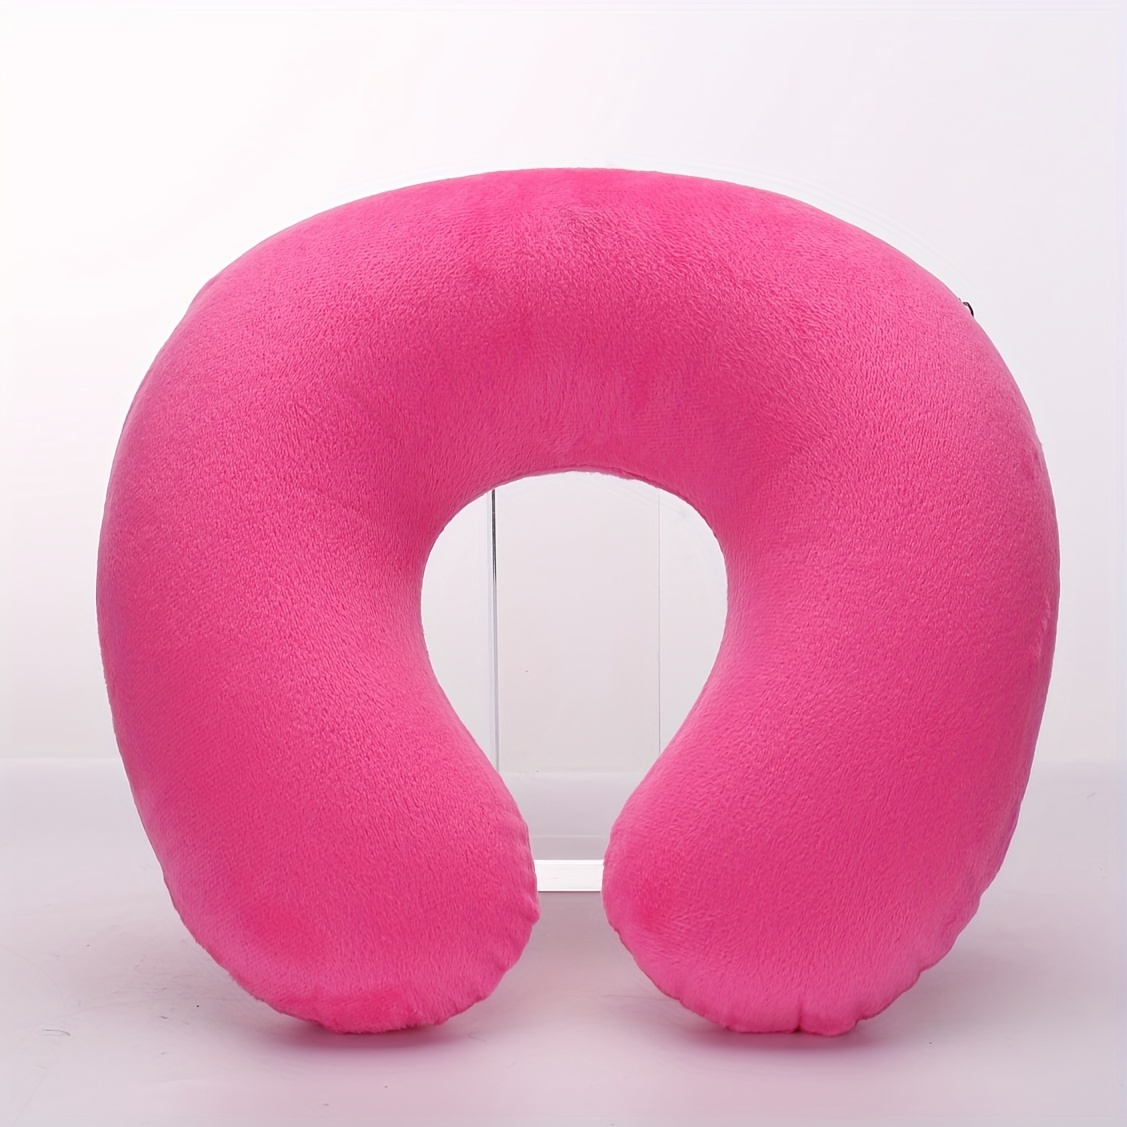 Neck Pillow For Traveling,travel Neck Pillow,portable,pink